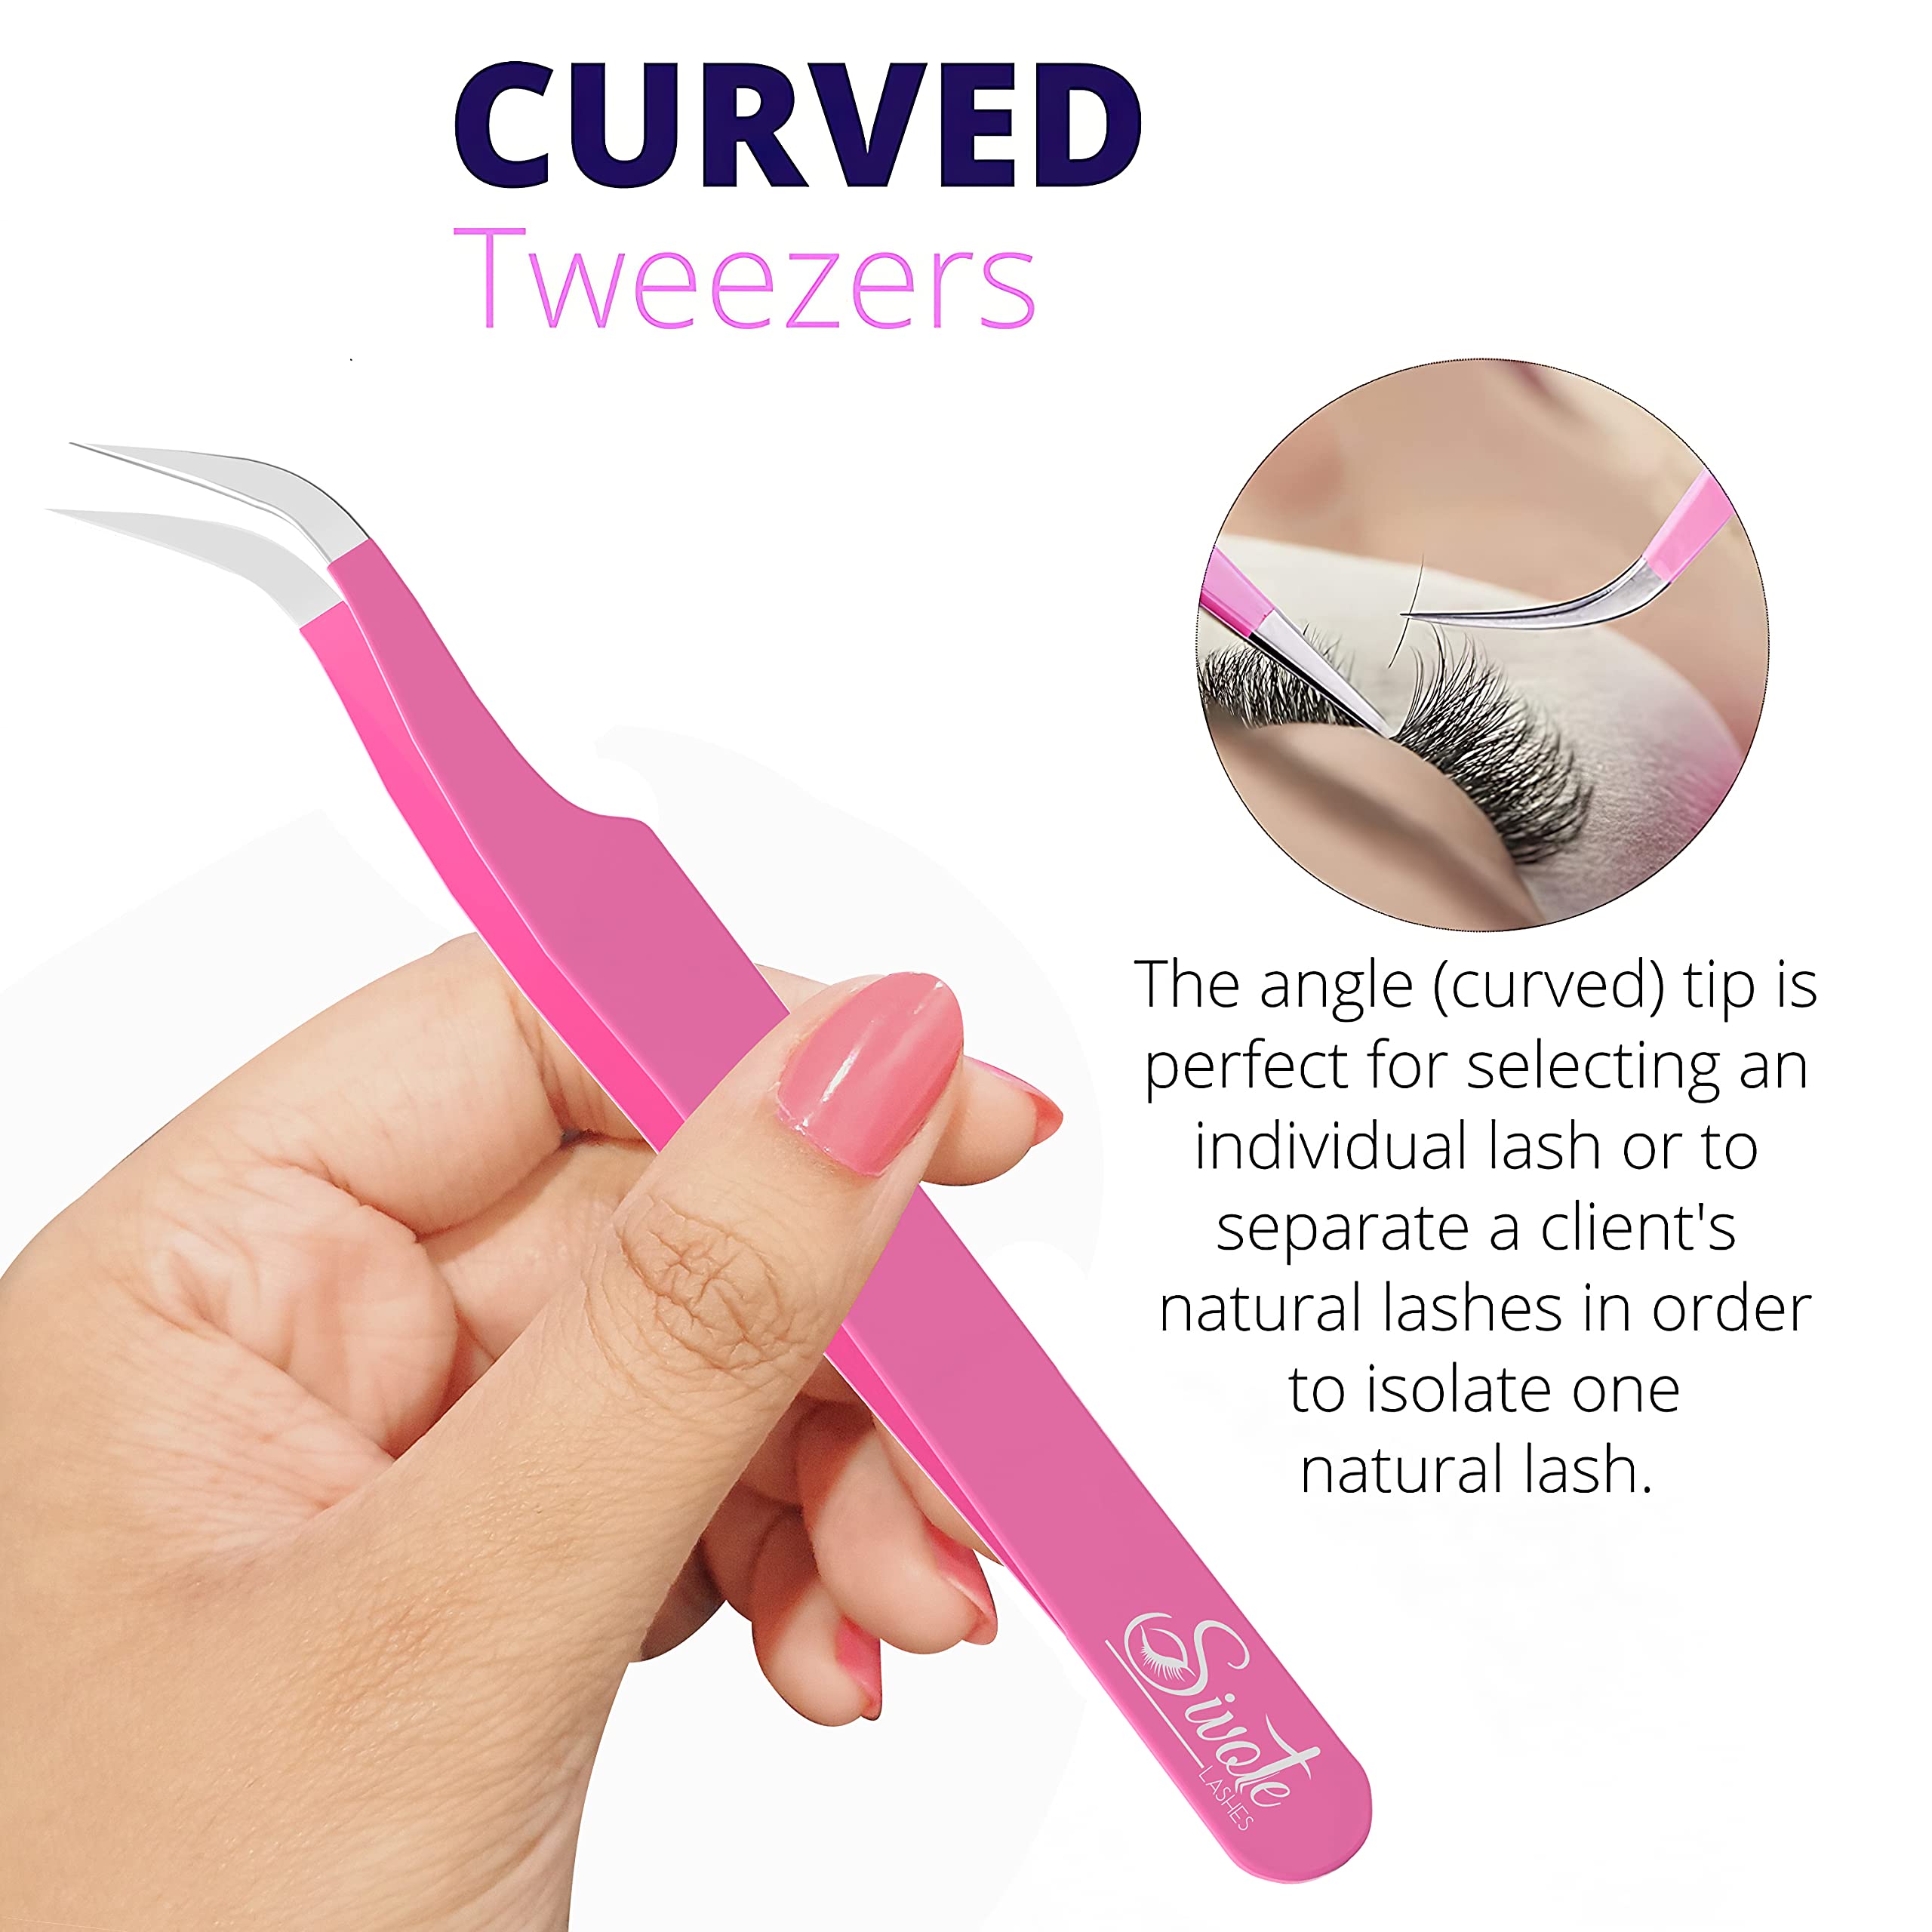 SIVOTE Lash Tweezers for Eyelash Extensions for Volume, Isolation & Classic Lashes, 3 Pack, Pink